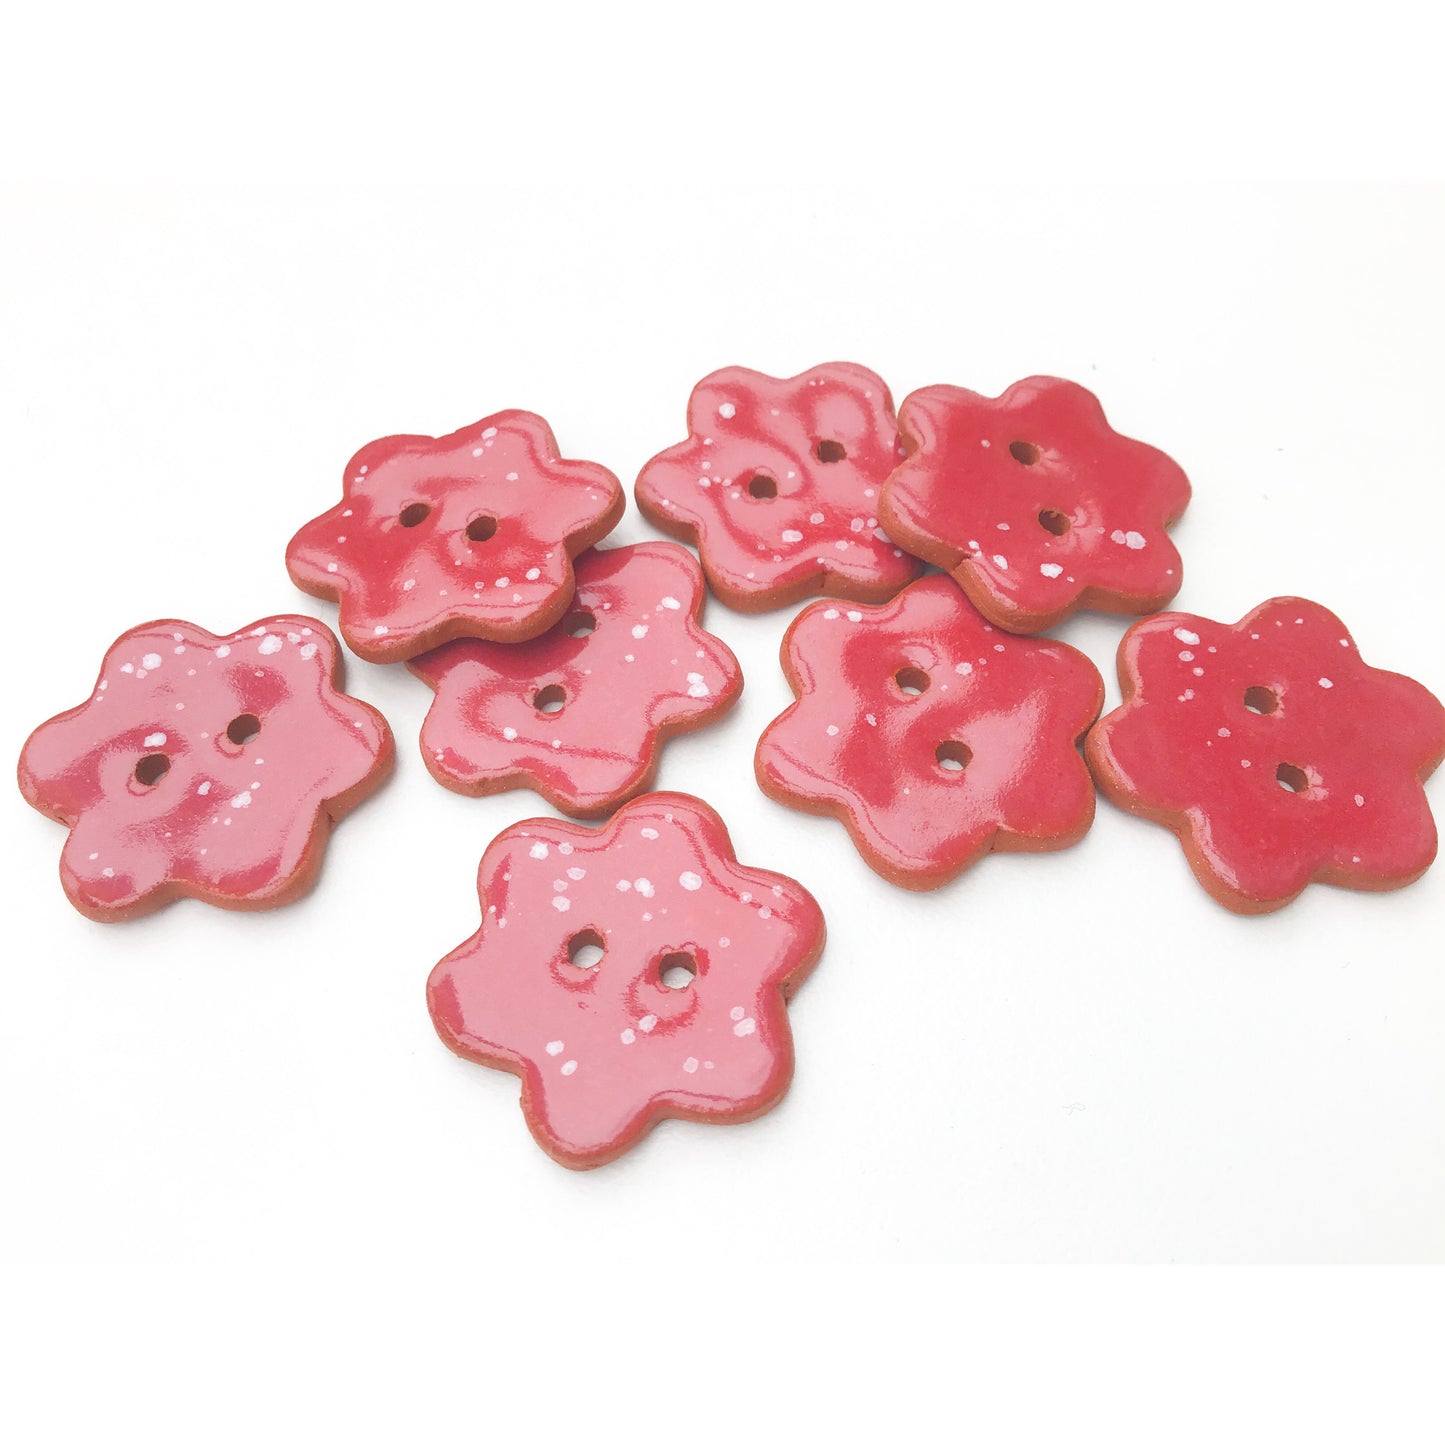 Red Flower Buttons with White Speckles - Ceramic Flower Buttons - 7/8" - 8 Pack (ws-177)